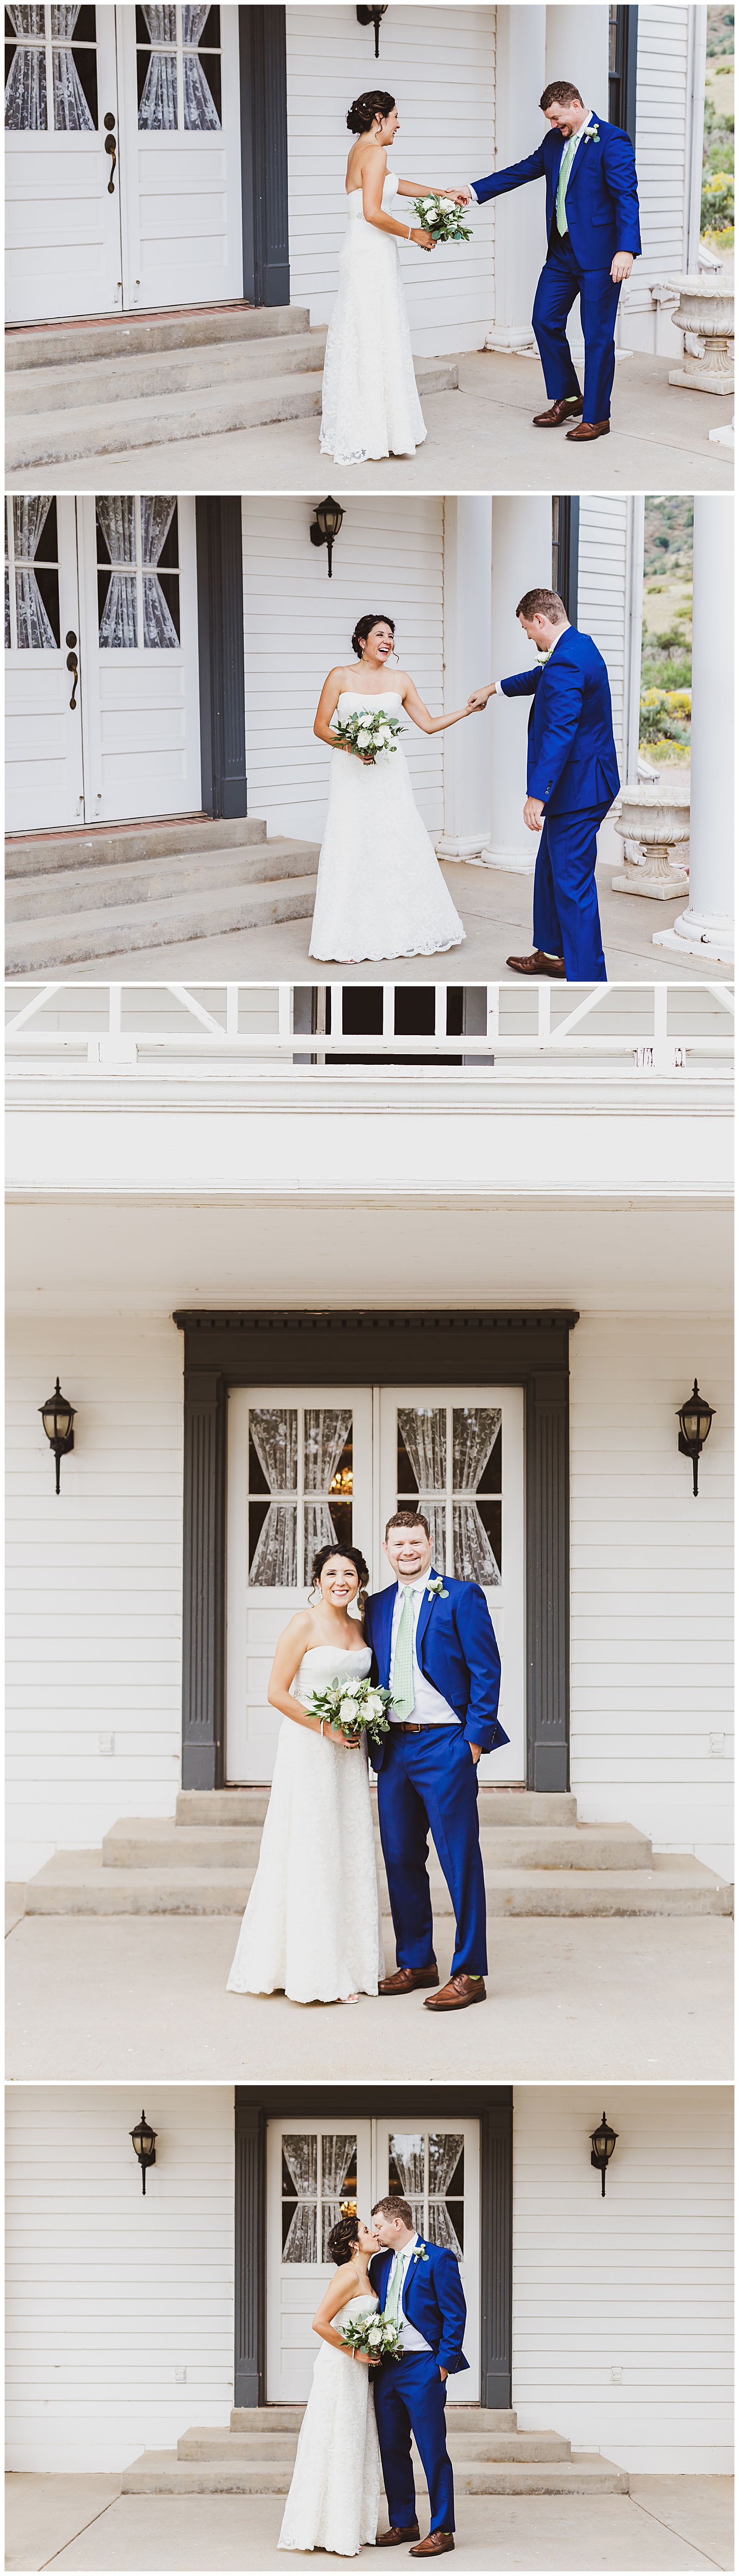 formal couple photos at willow ridge manor in morrison, co